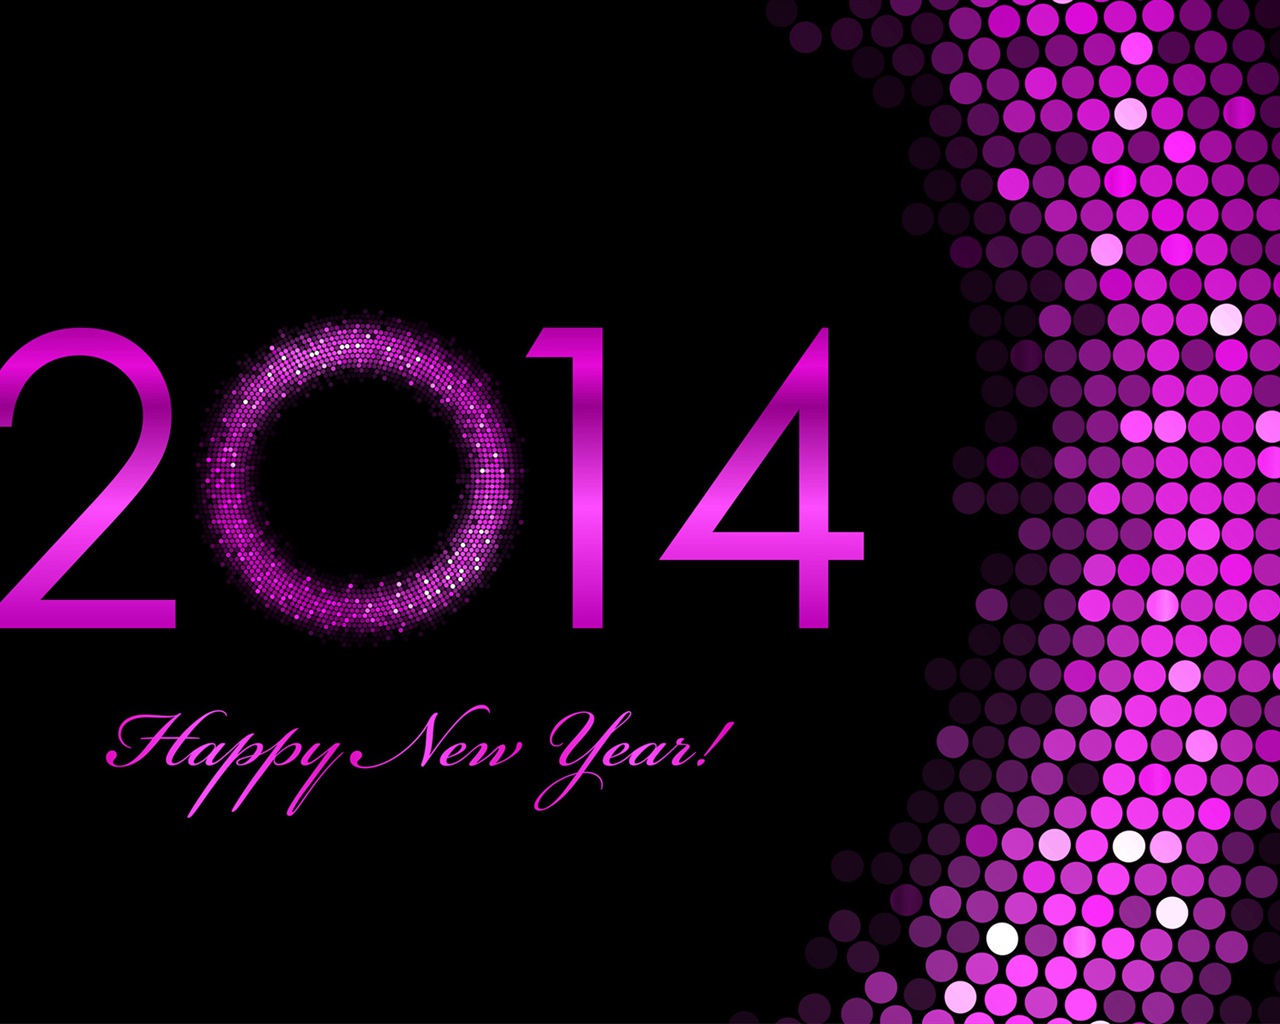 2014 New Year Theme HD Wallpapers (2) #1 - 1280x1024